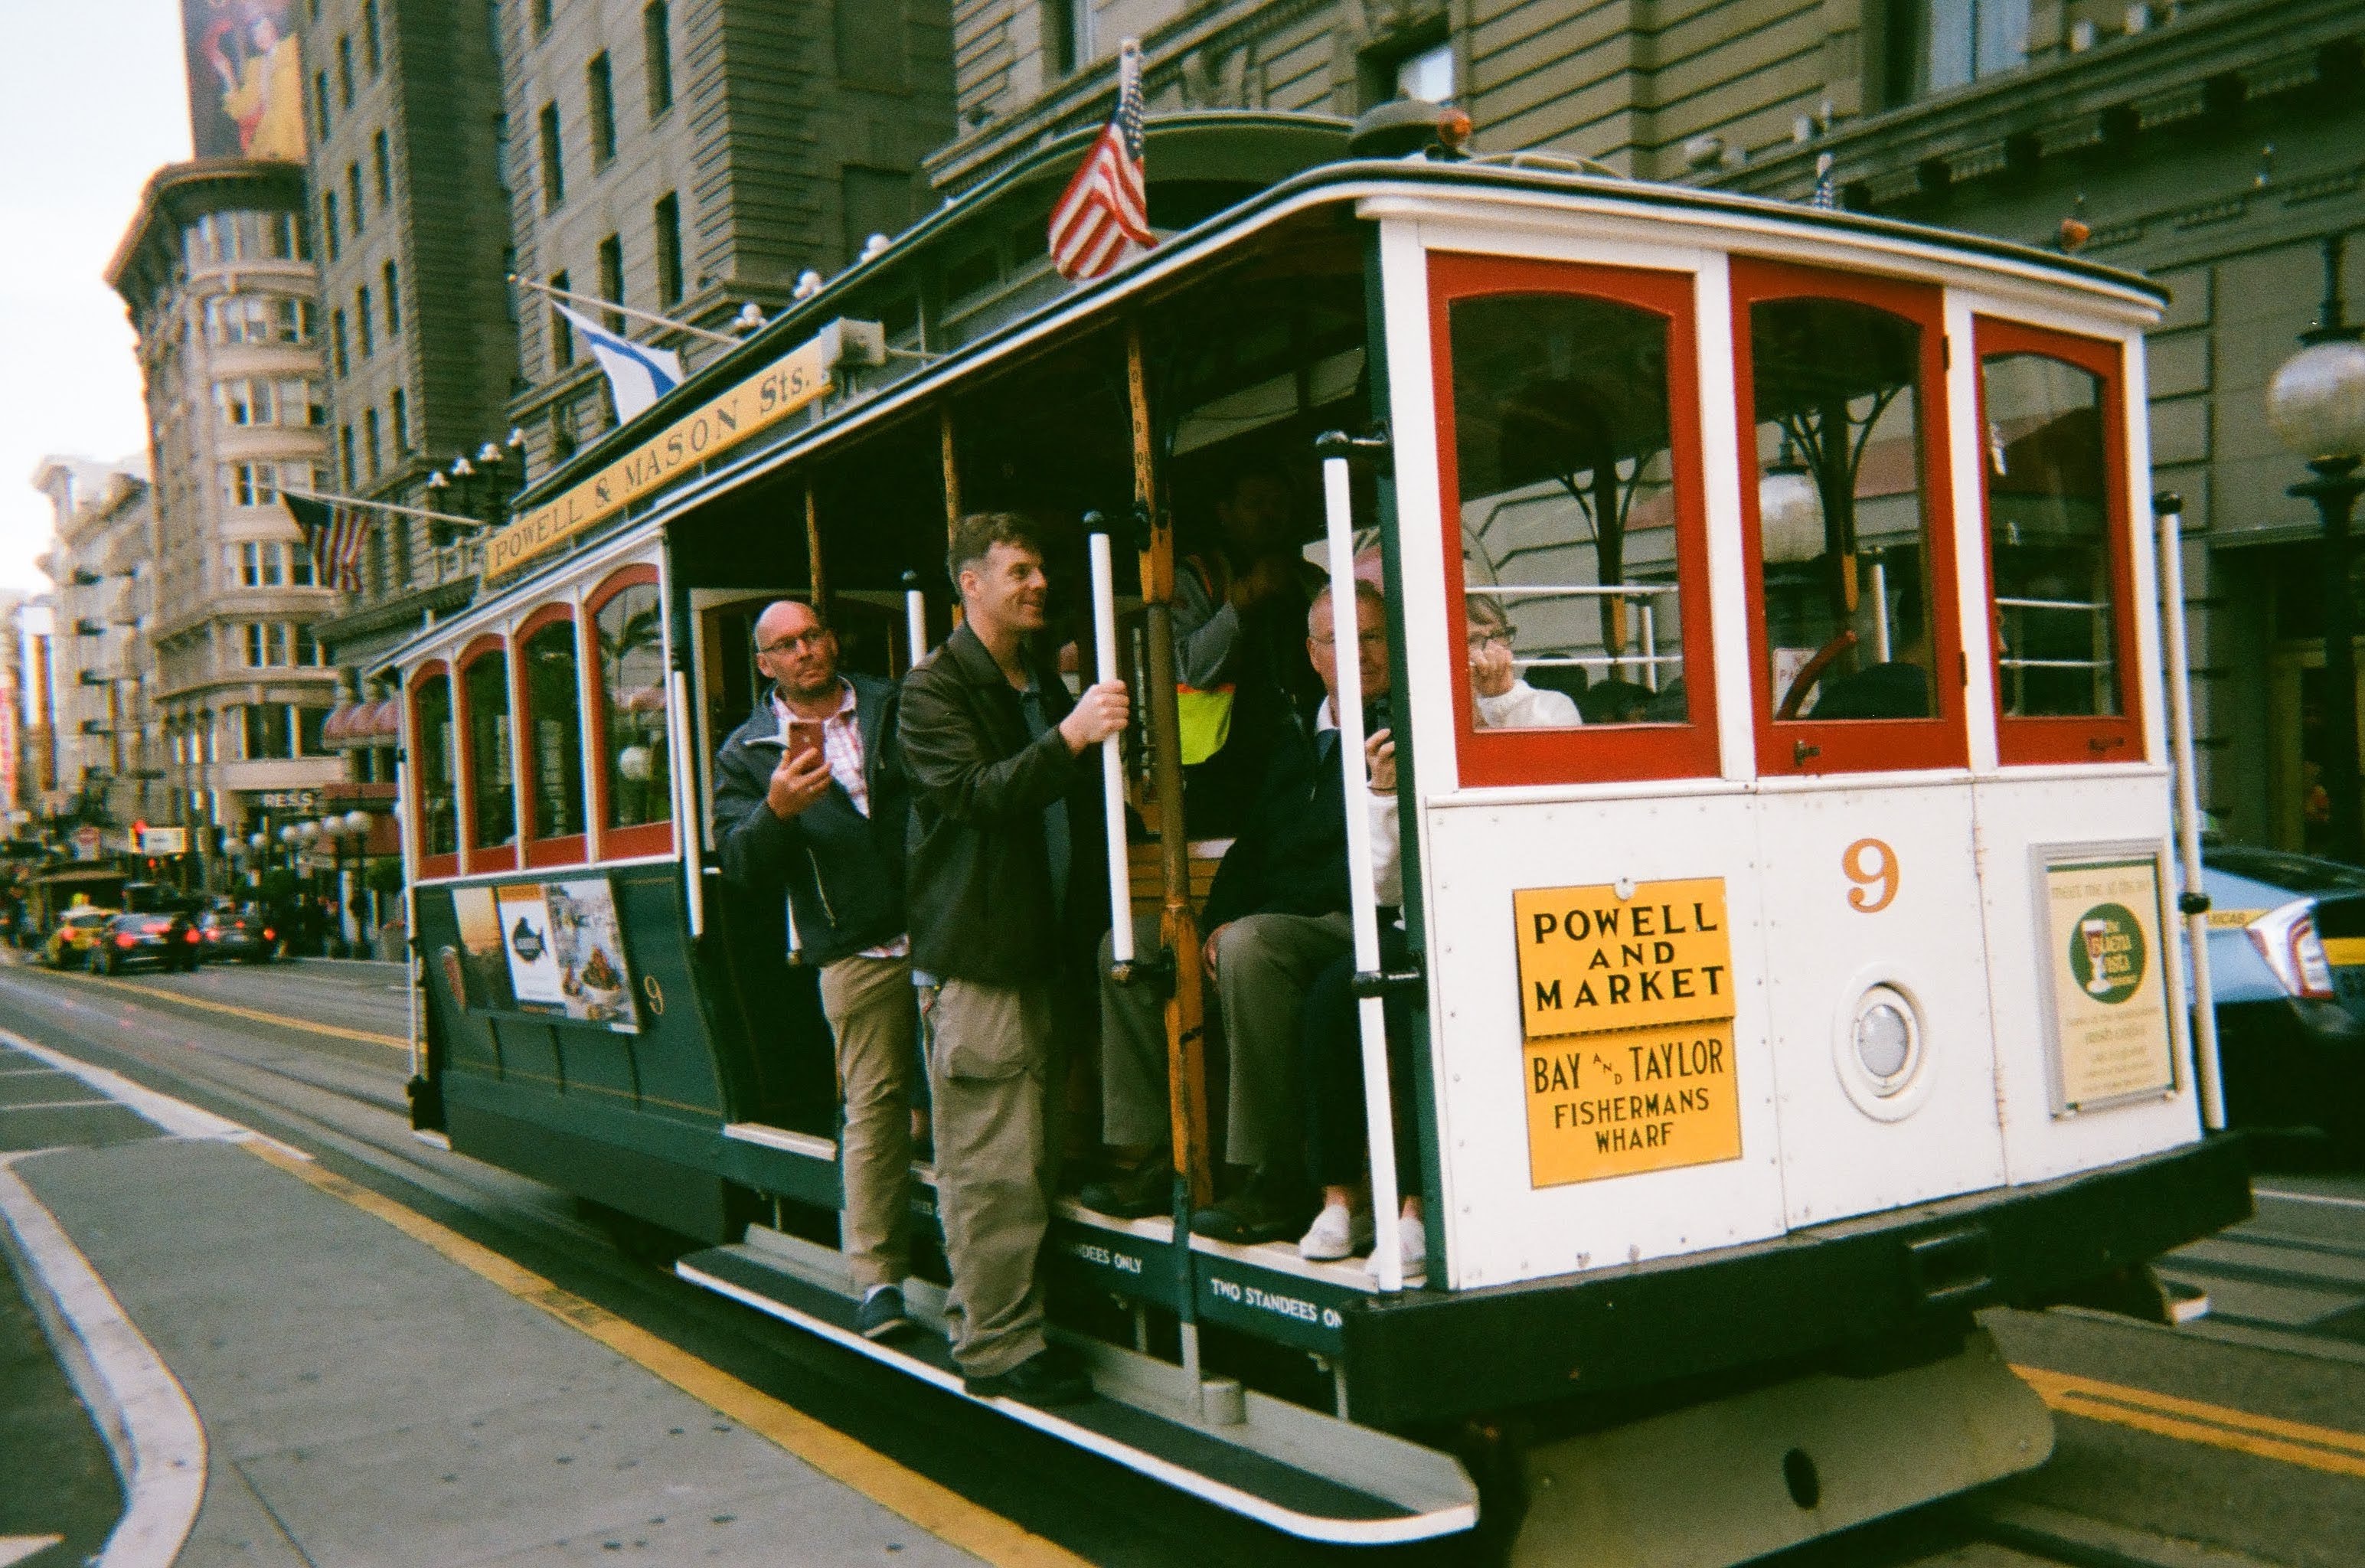 Take in the Sights with Old Town Trolley Tours in Boston